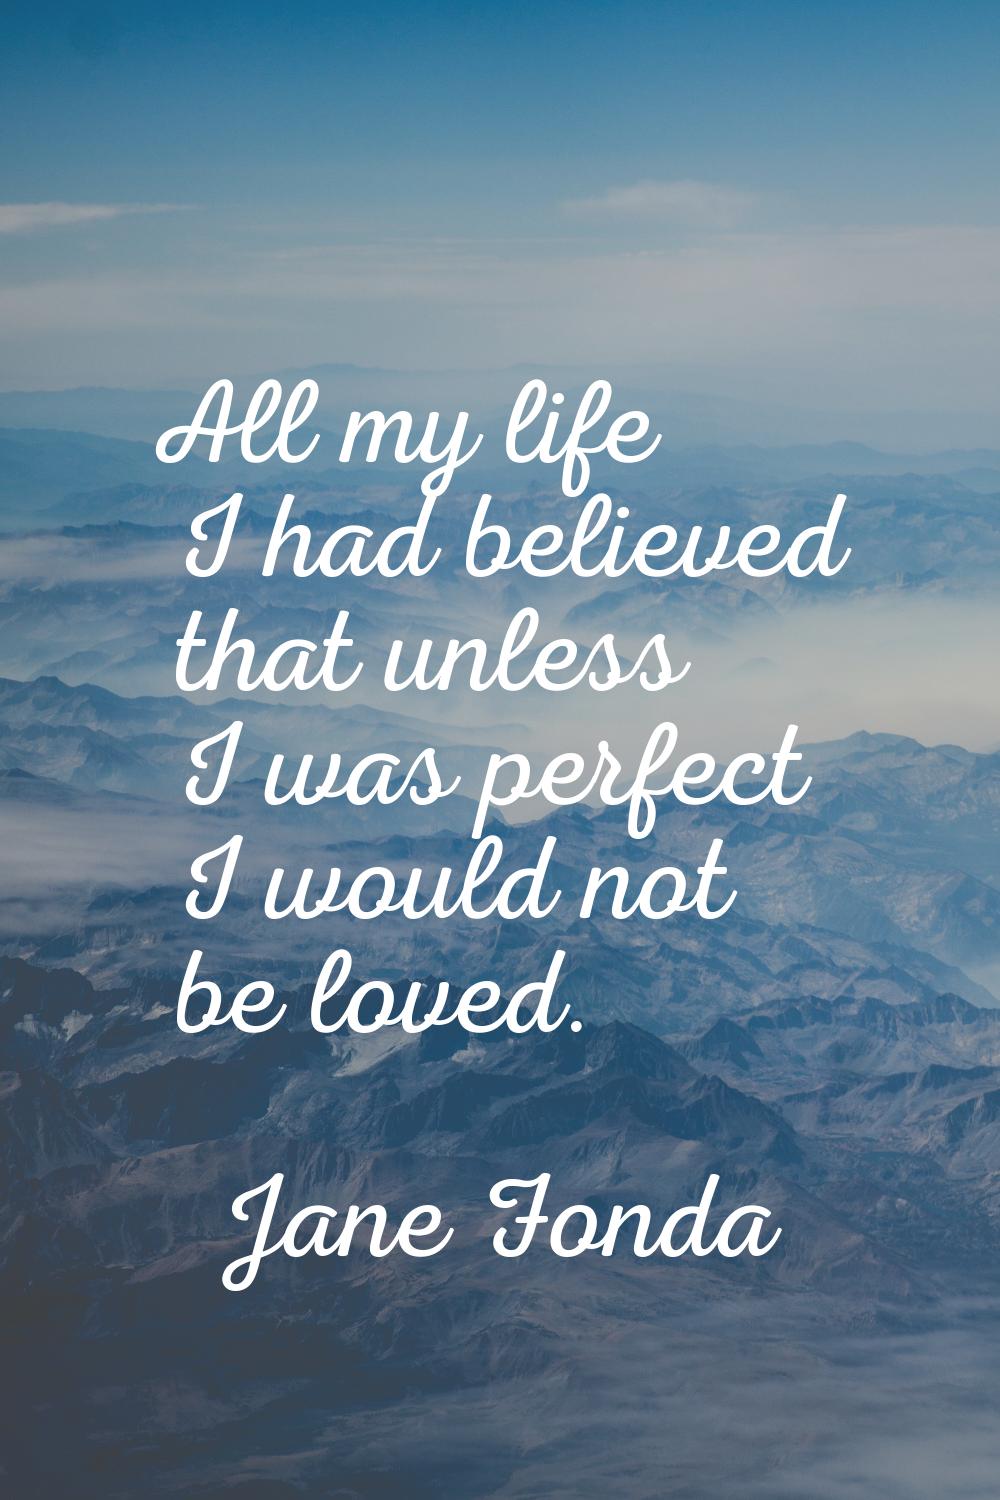 All my life I had believed that unless I was perfect I would not be loved.